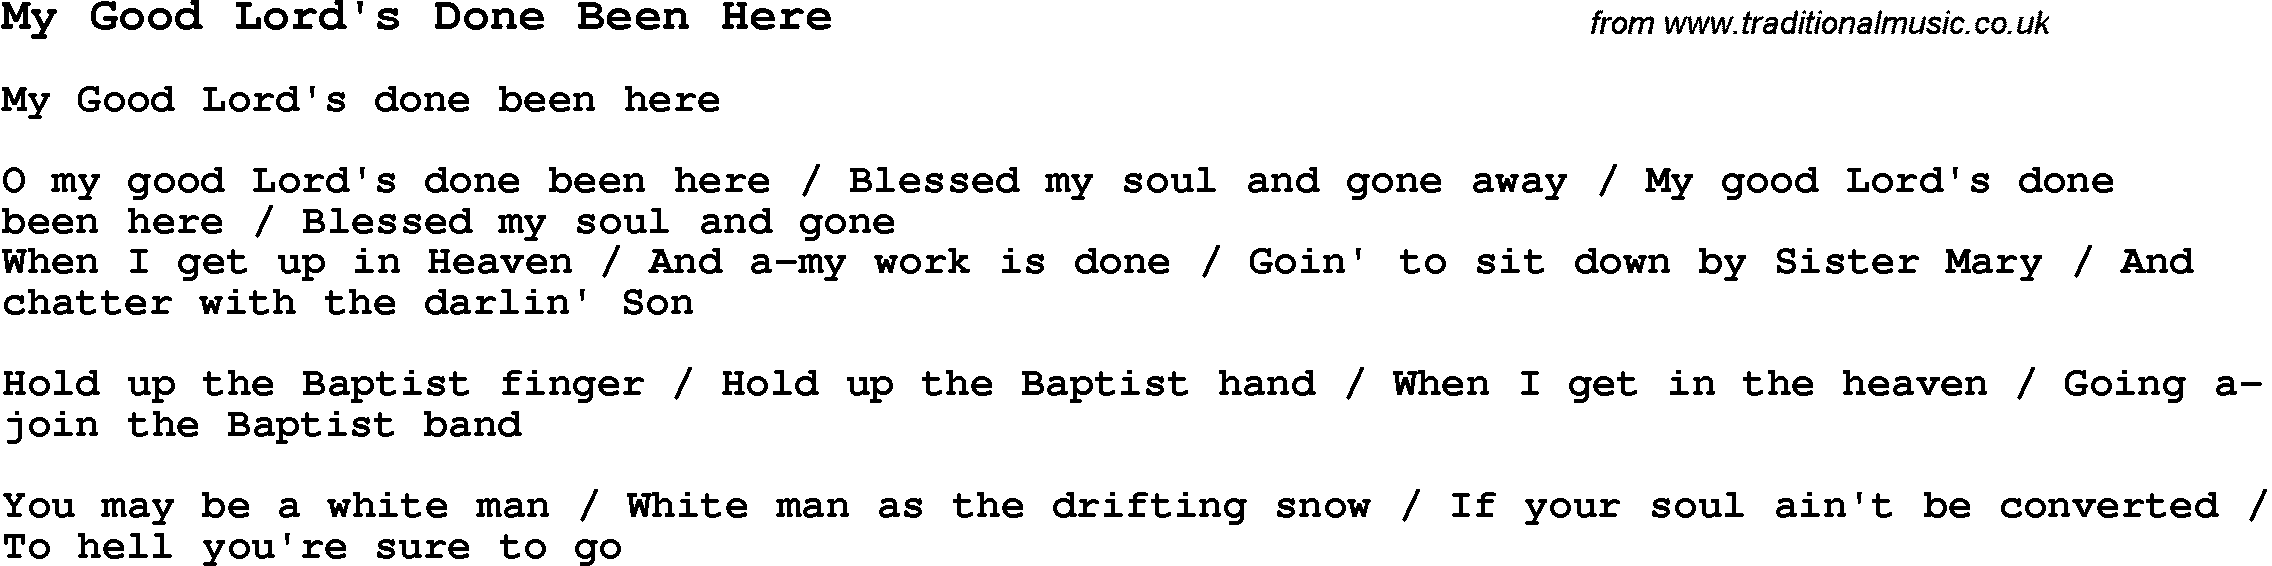 Negro Spiritual Song Lyrics for My Good Lord's Done Been Here